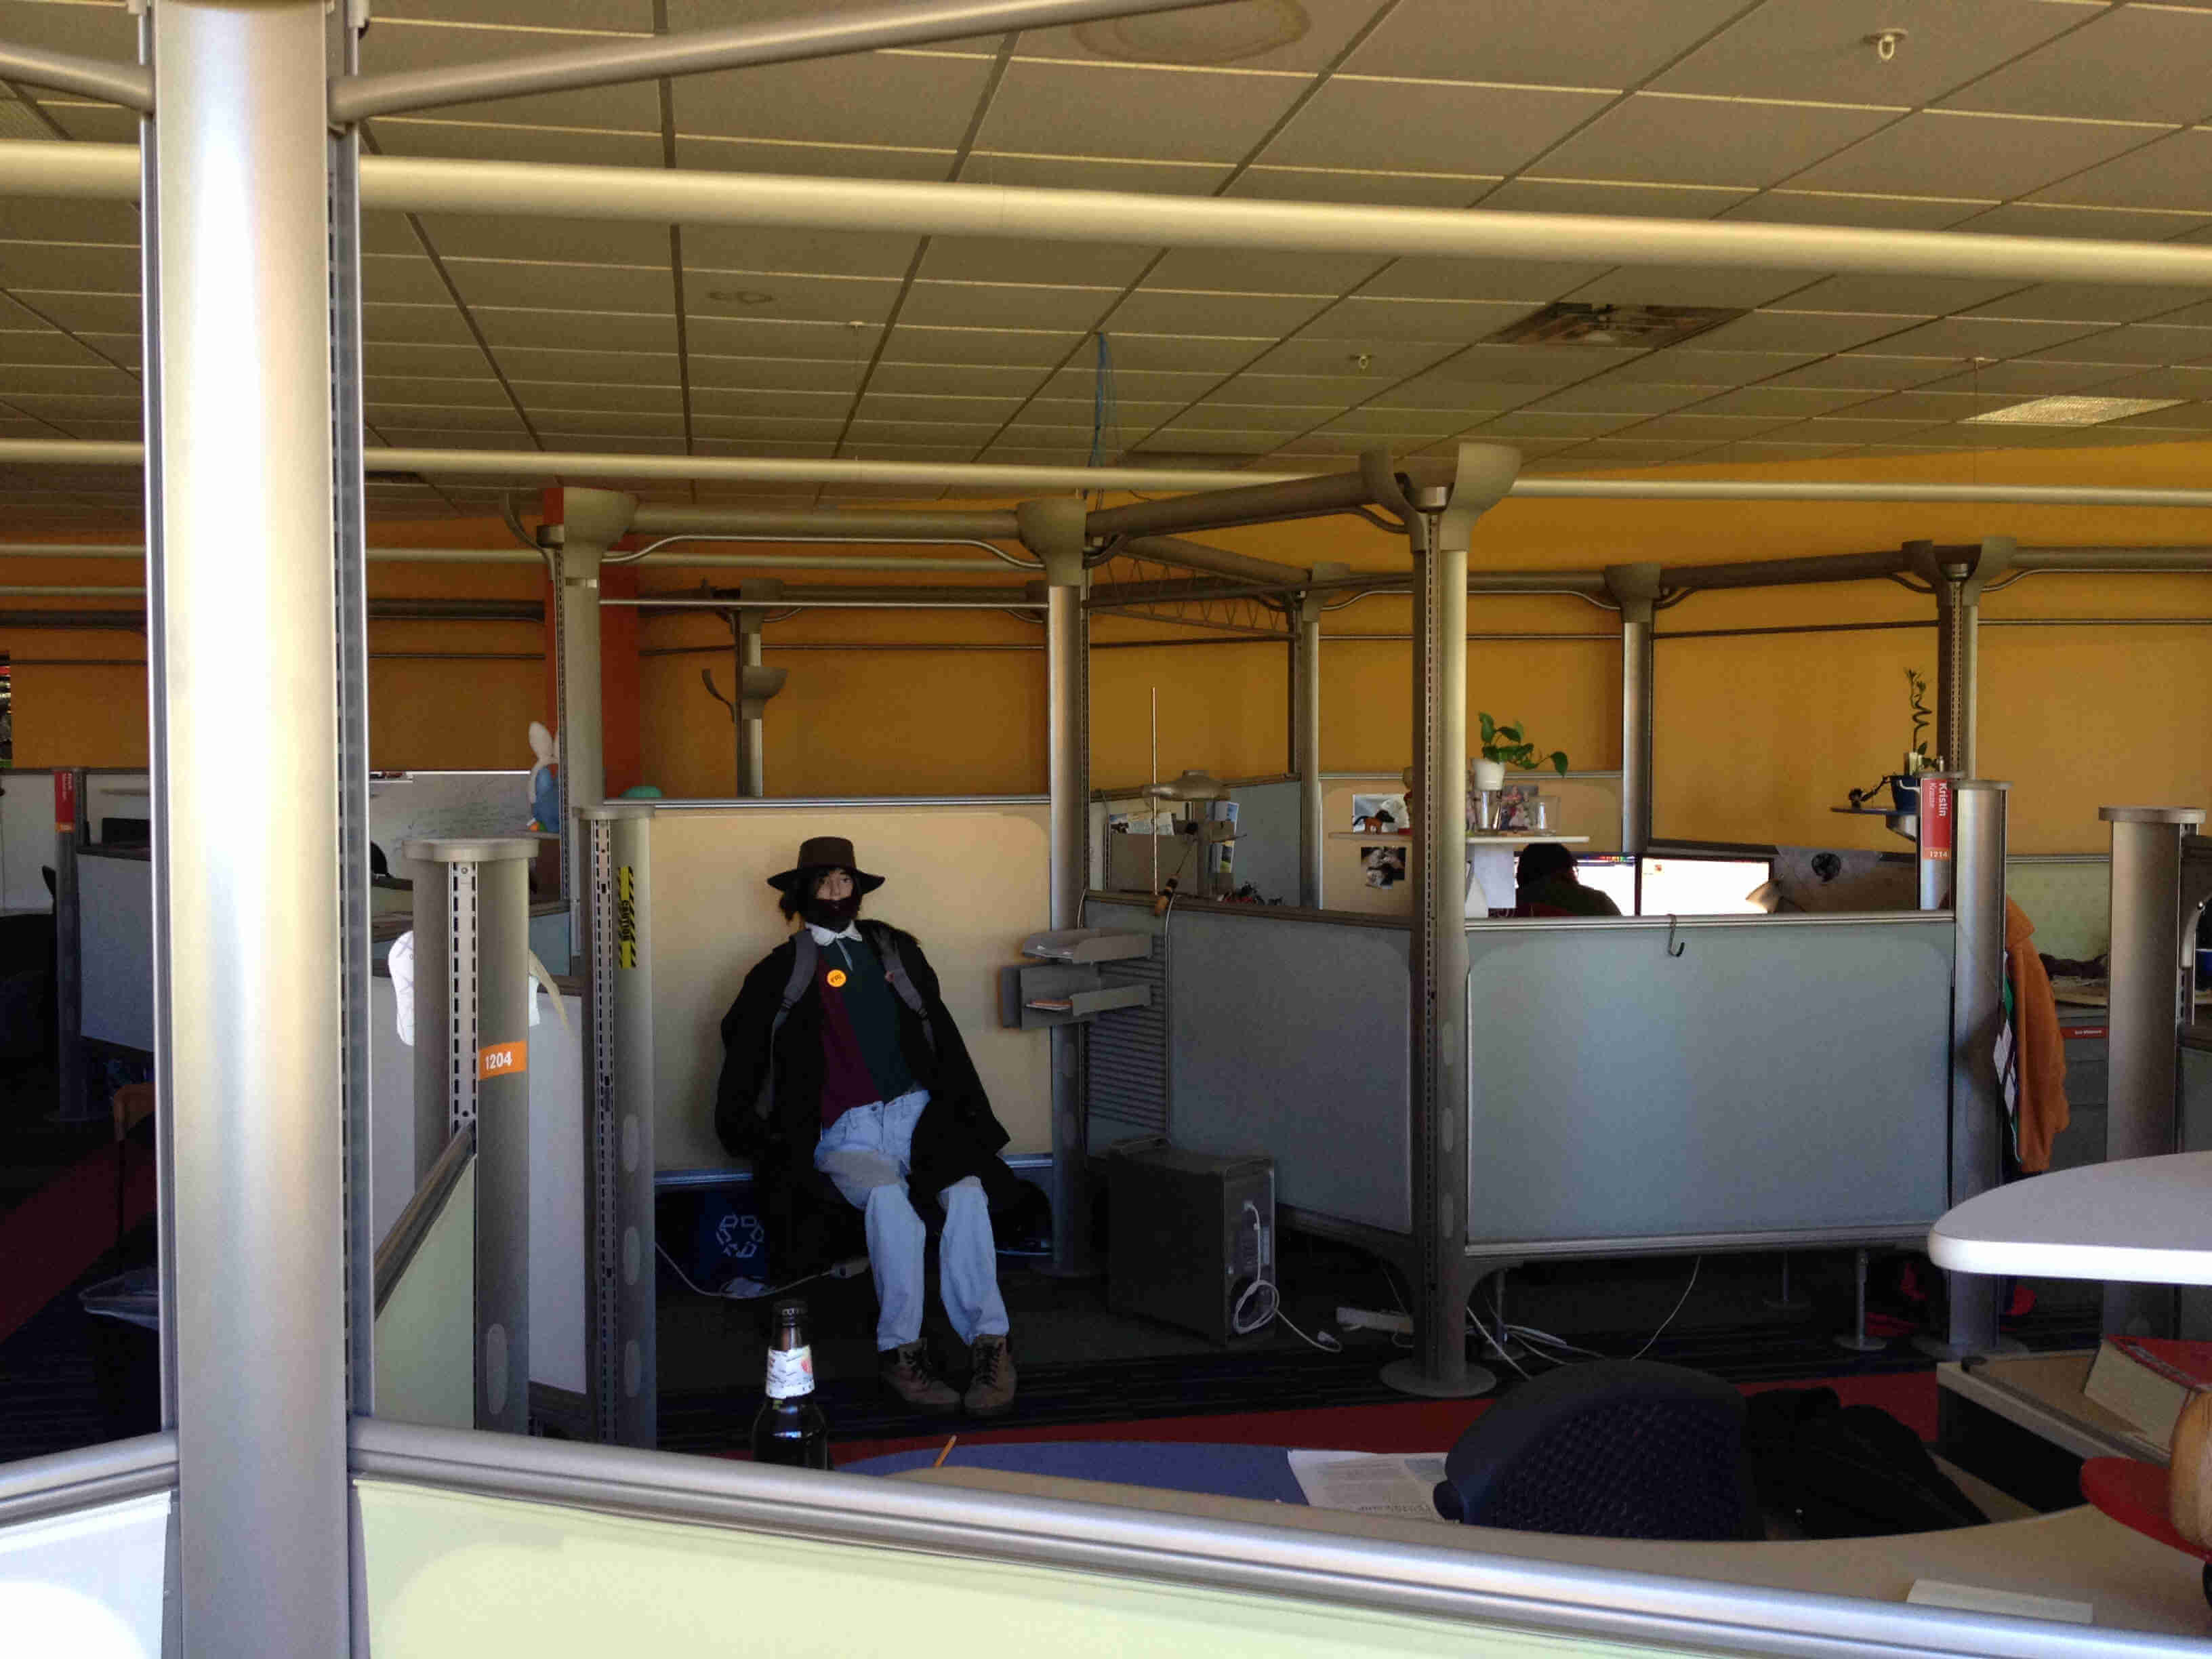 An unlit office room with cubicles, with a dressed up mannequin sitting on a bench, outside one of the office cubes